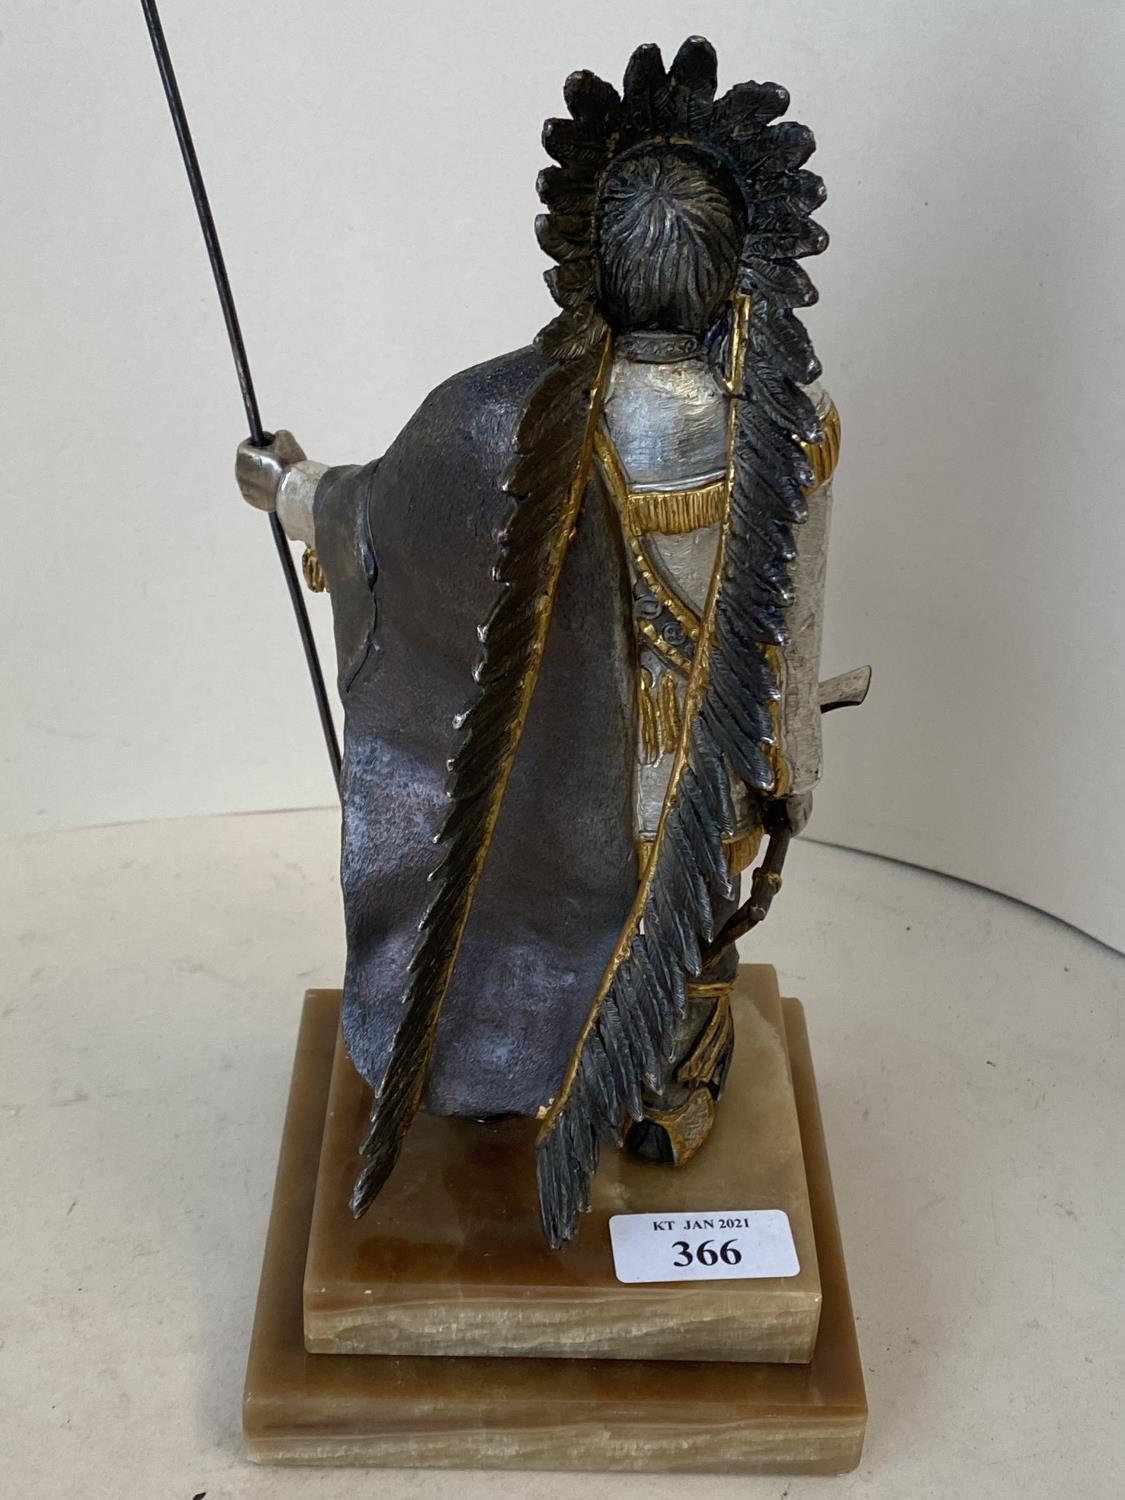 Unusual Good quality metal figure of a Red Indian warrior, intricately carved and decorated with a